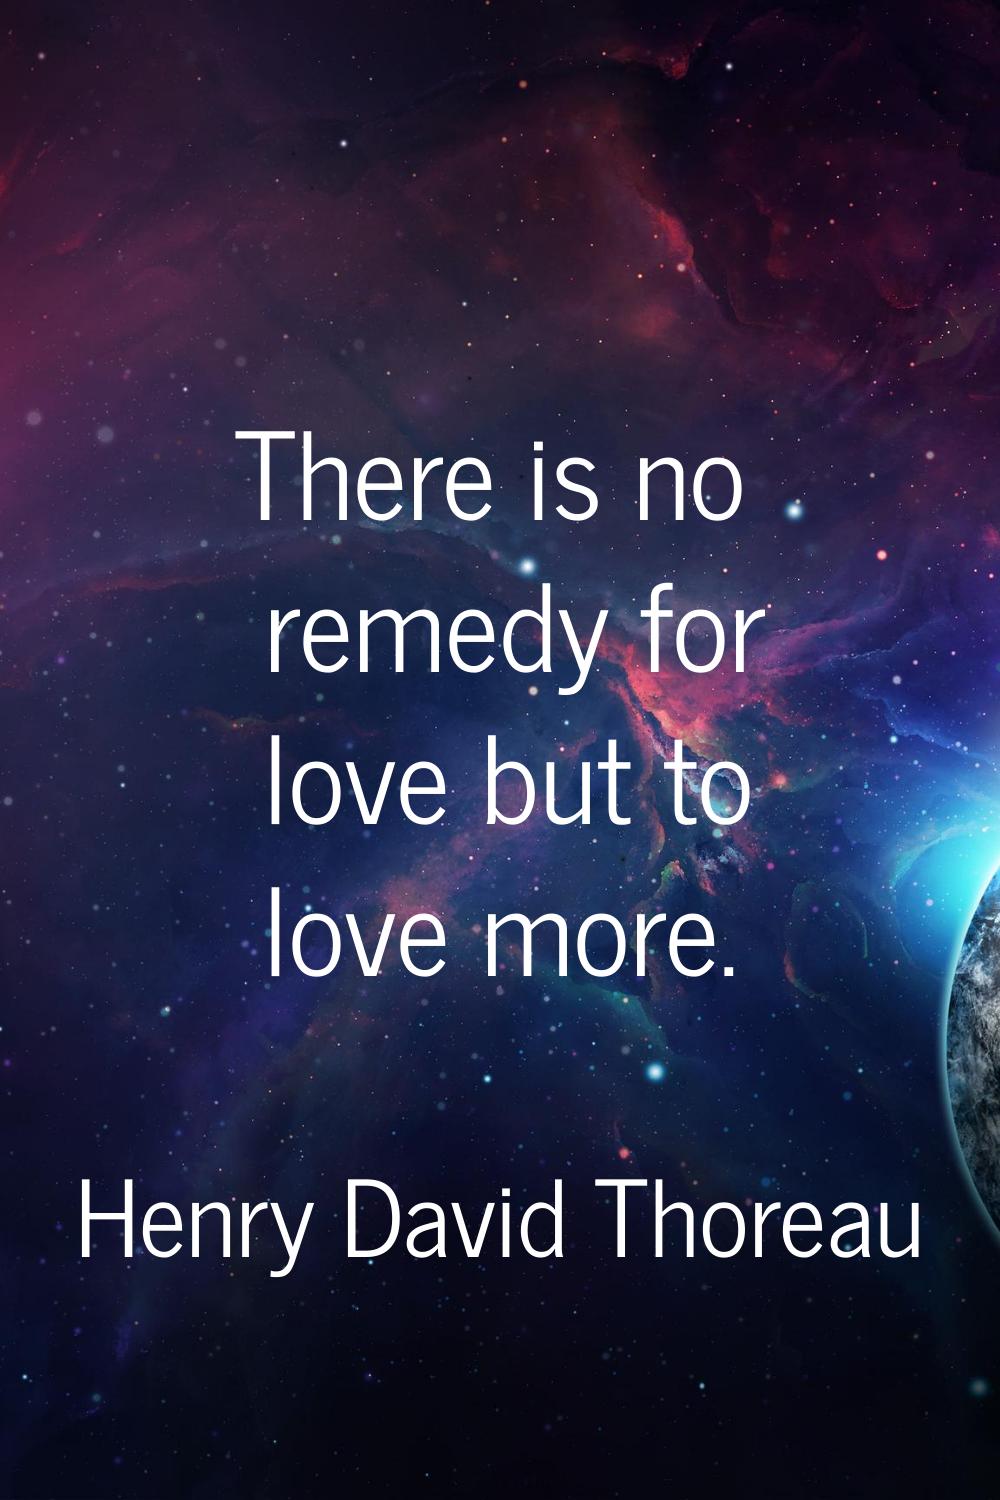 There is no remedy for love but to love more.